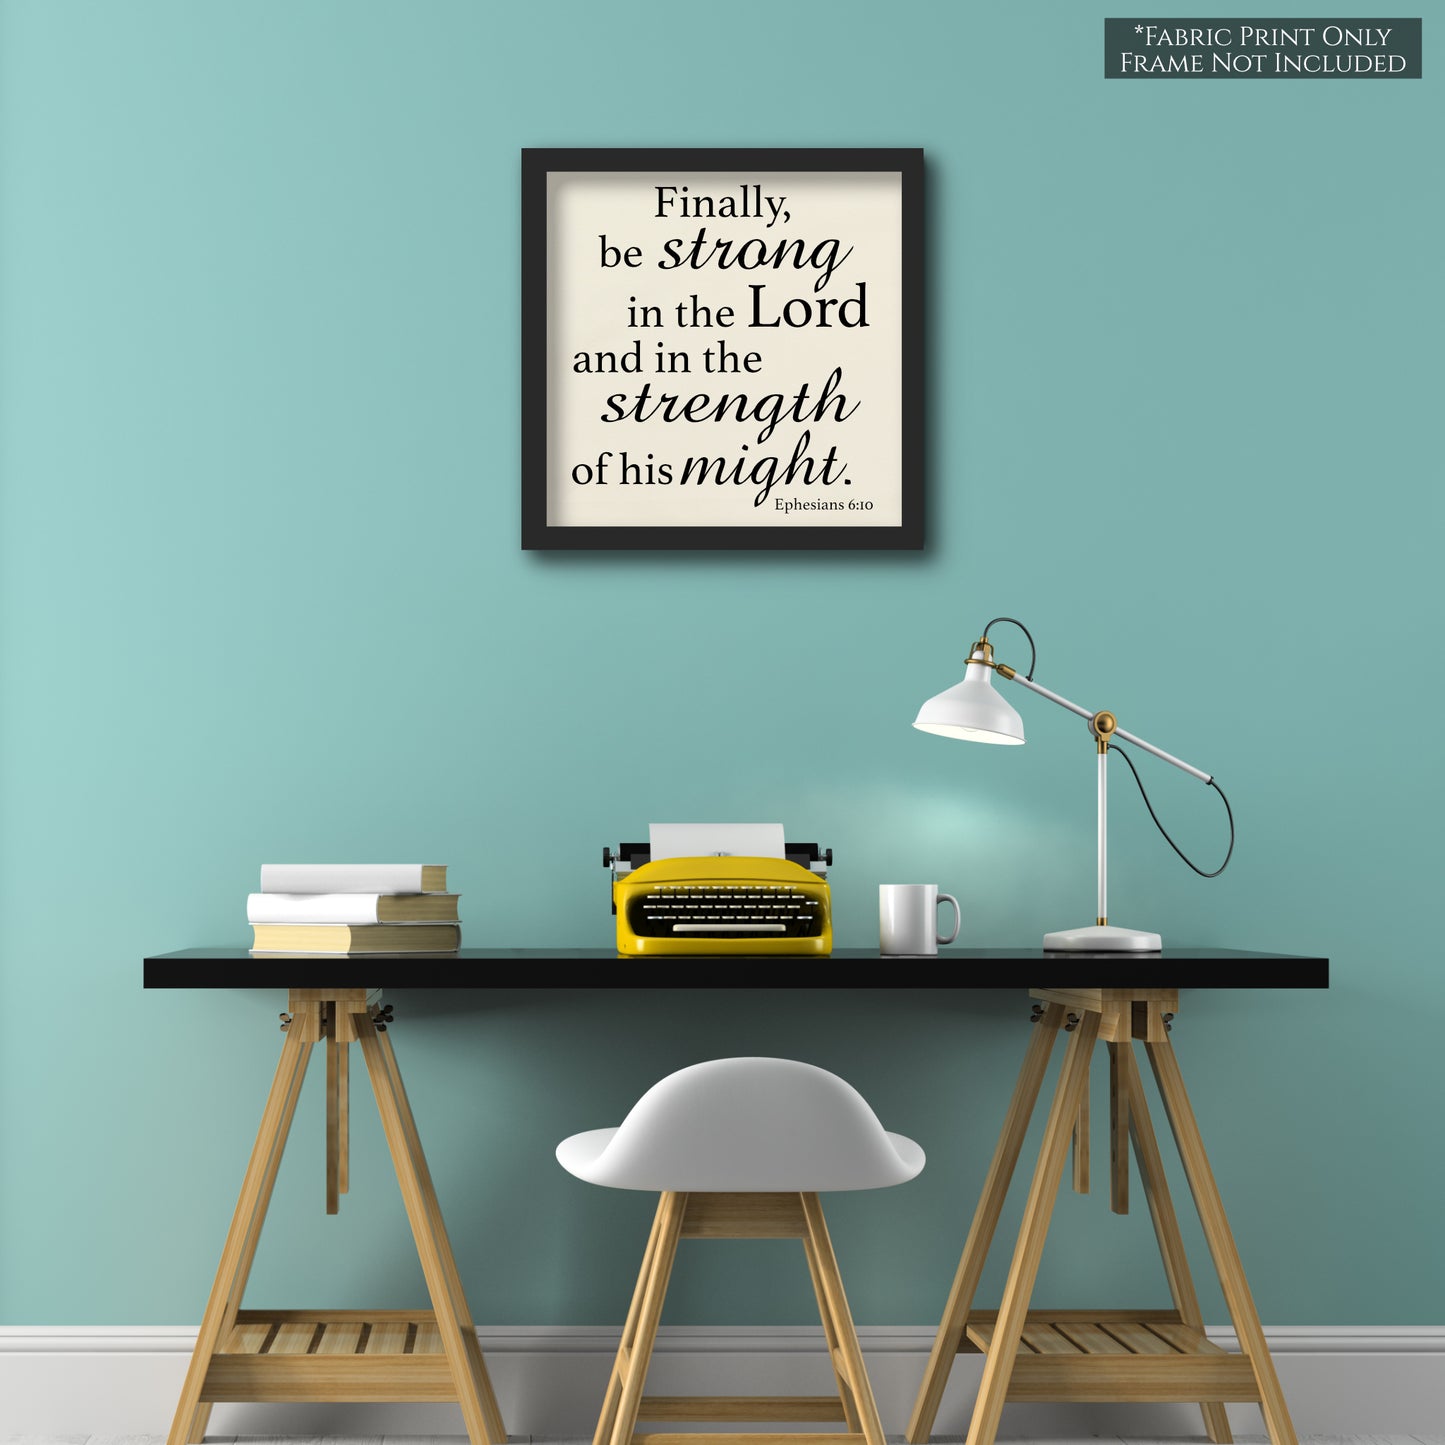 Finally be strong in the Lord and in the strength of his might - Ephesians 6:10 - Fabric Panel Print - Wall Art